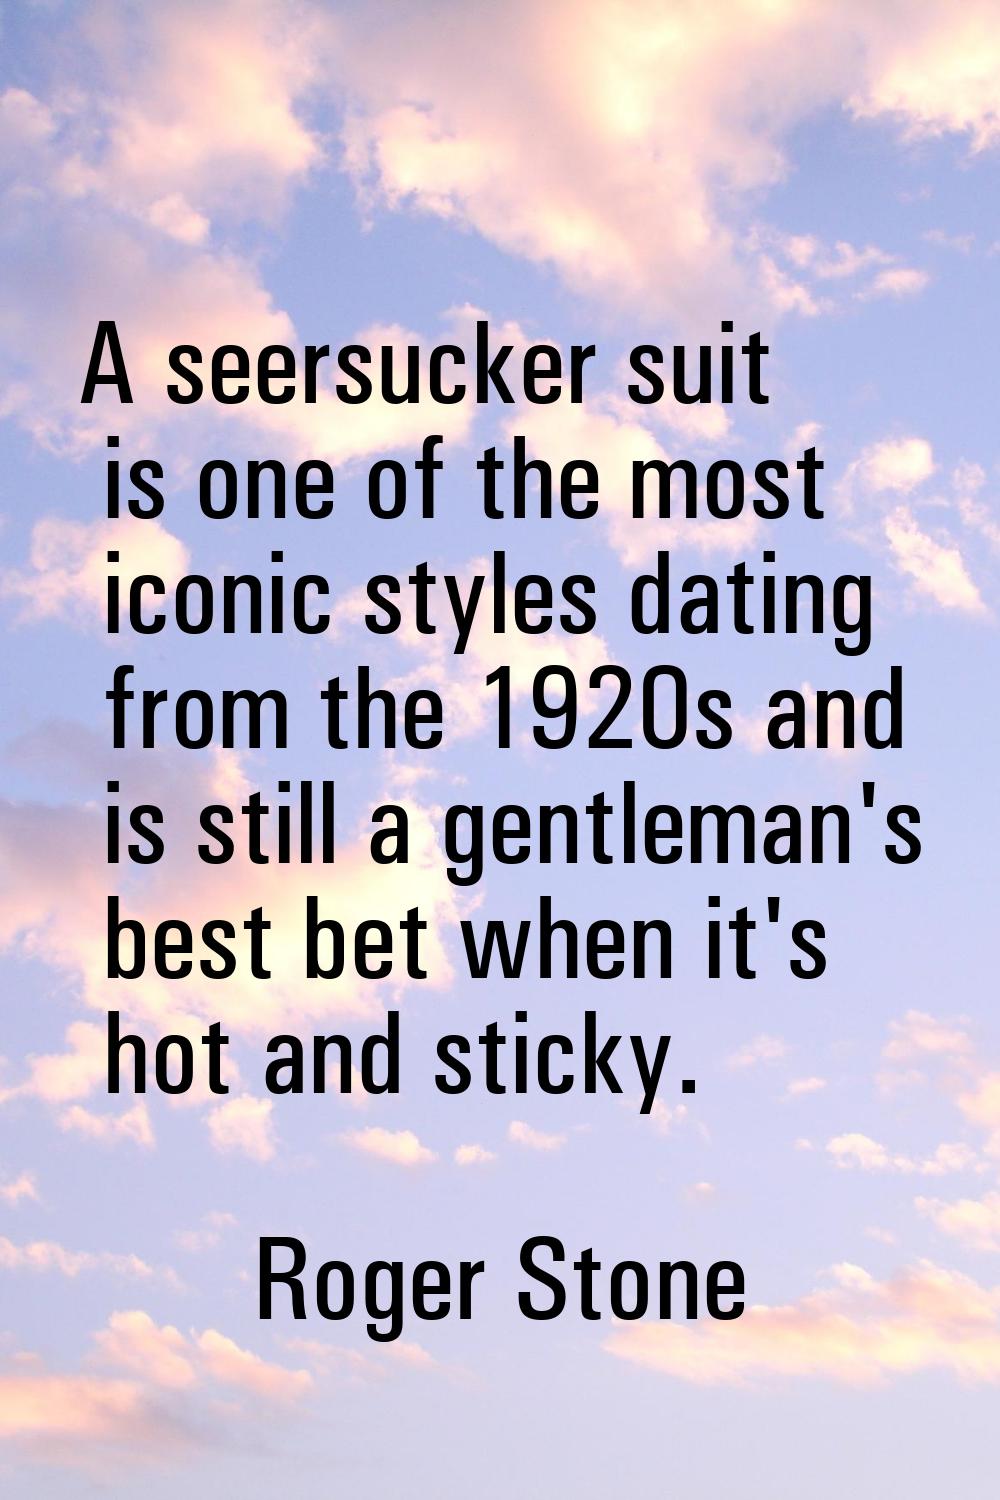 A seersucker suit is one of the most iconic styles dating from the 1920s and is still a gentleman's